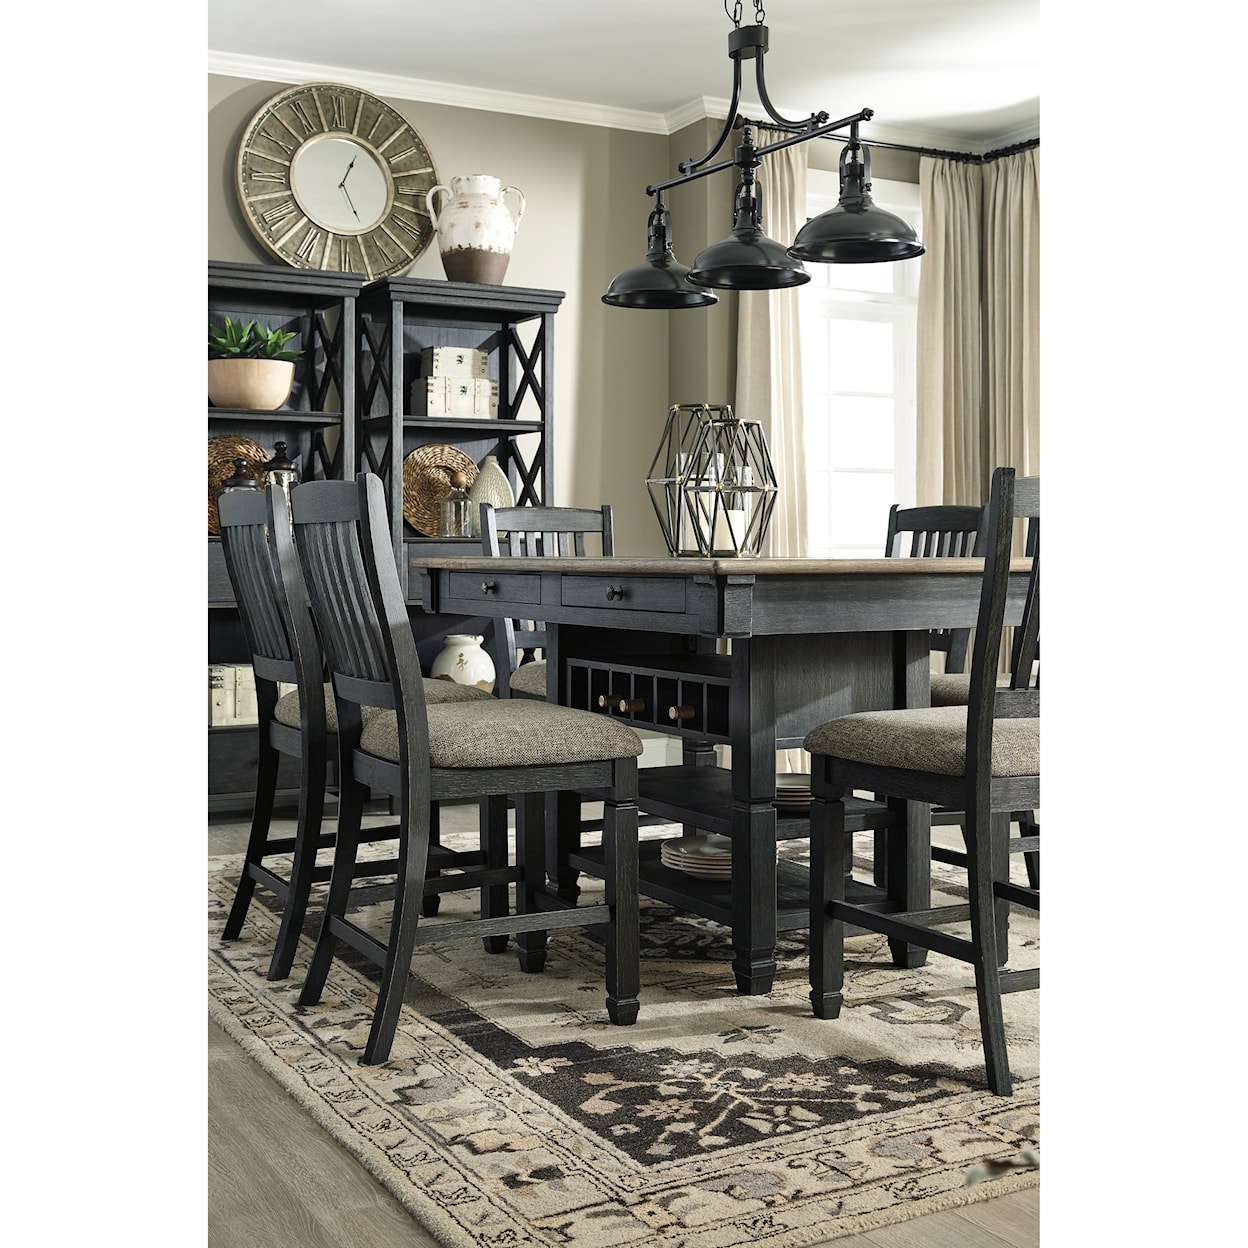 Signature Design by Ashley Tyler Creek Rectangular Dining Room Counter Table